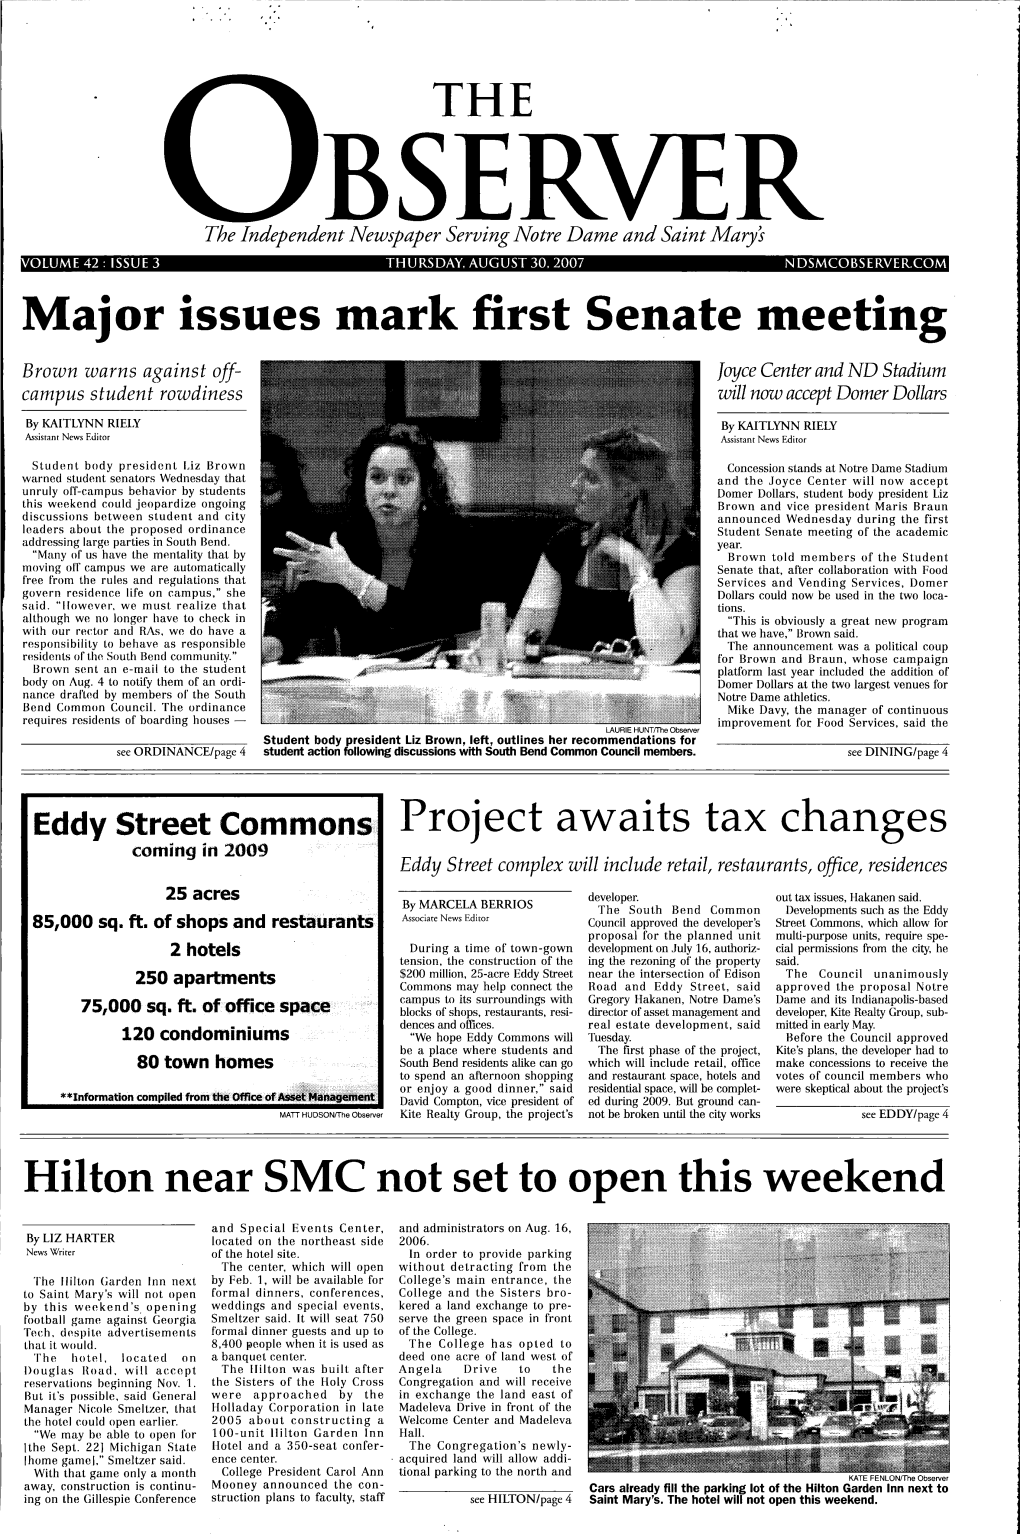 THE Major Issues Mark First Senate Meeting